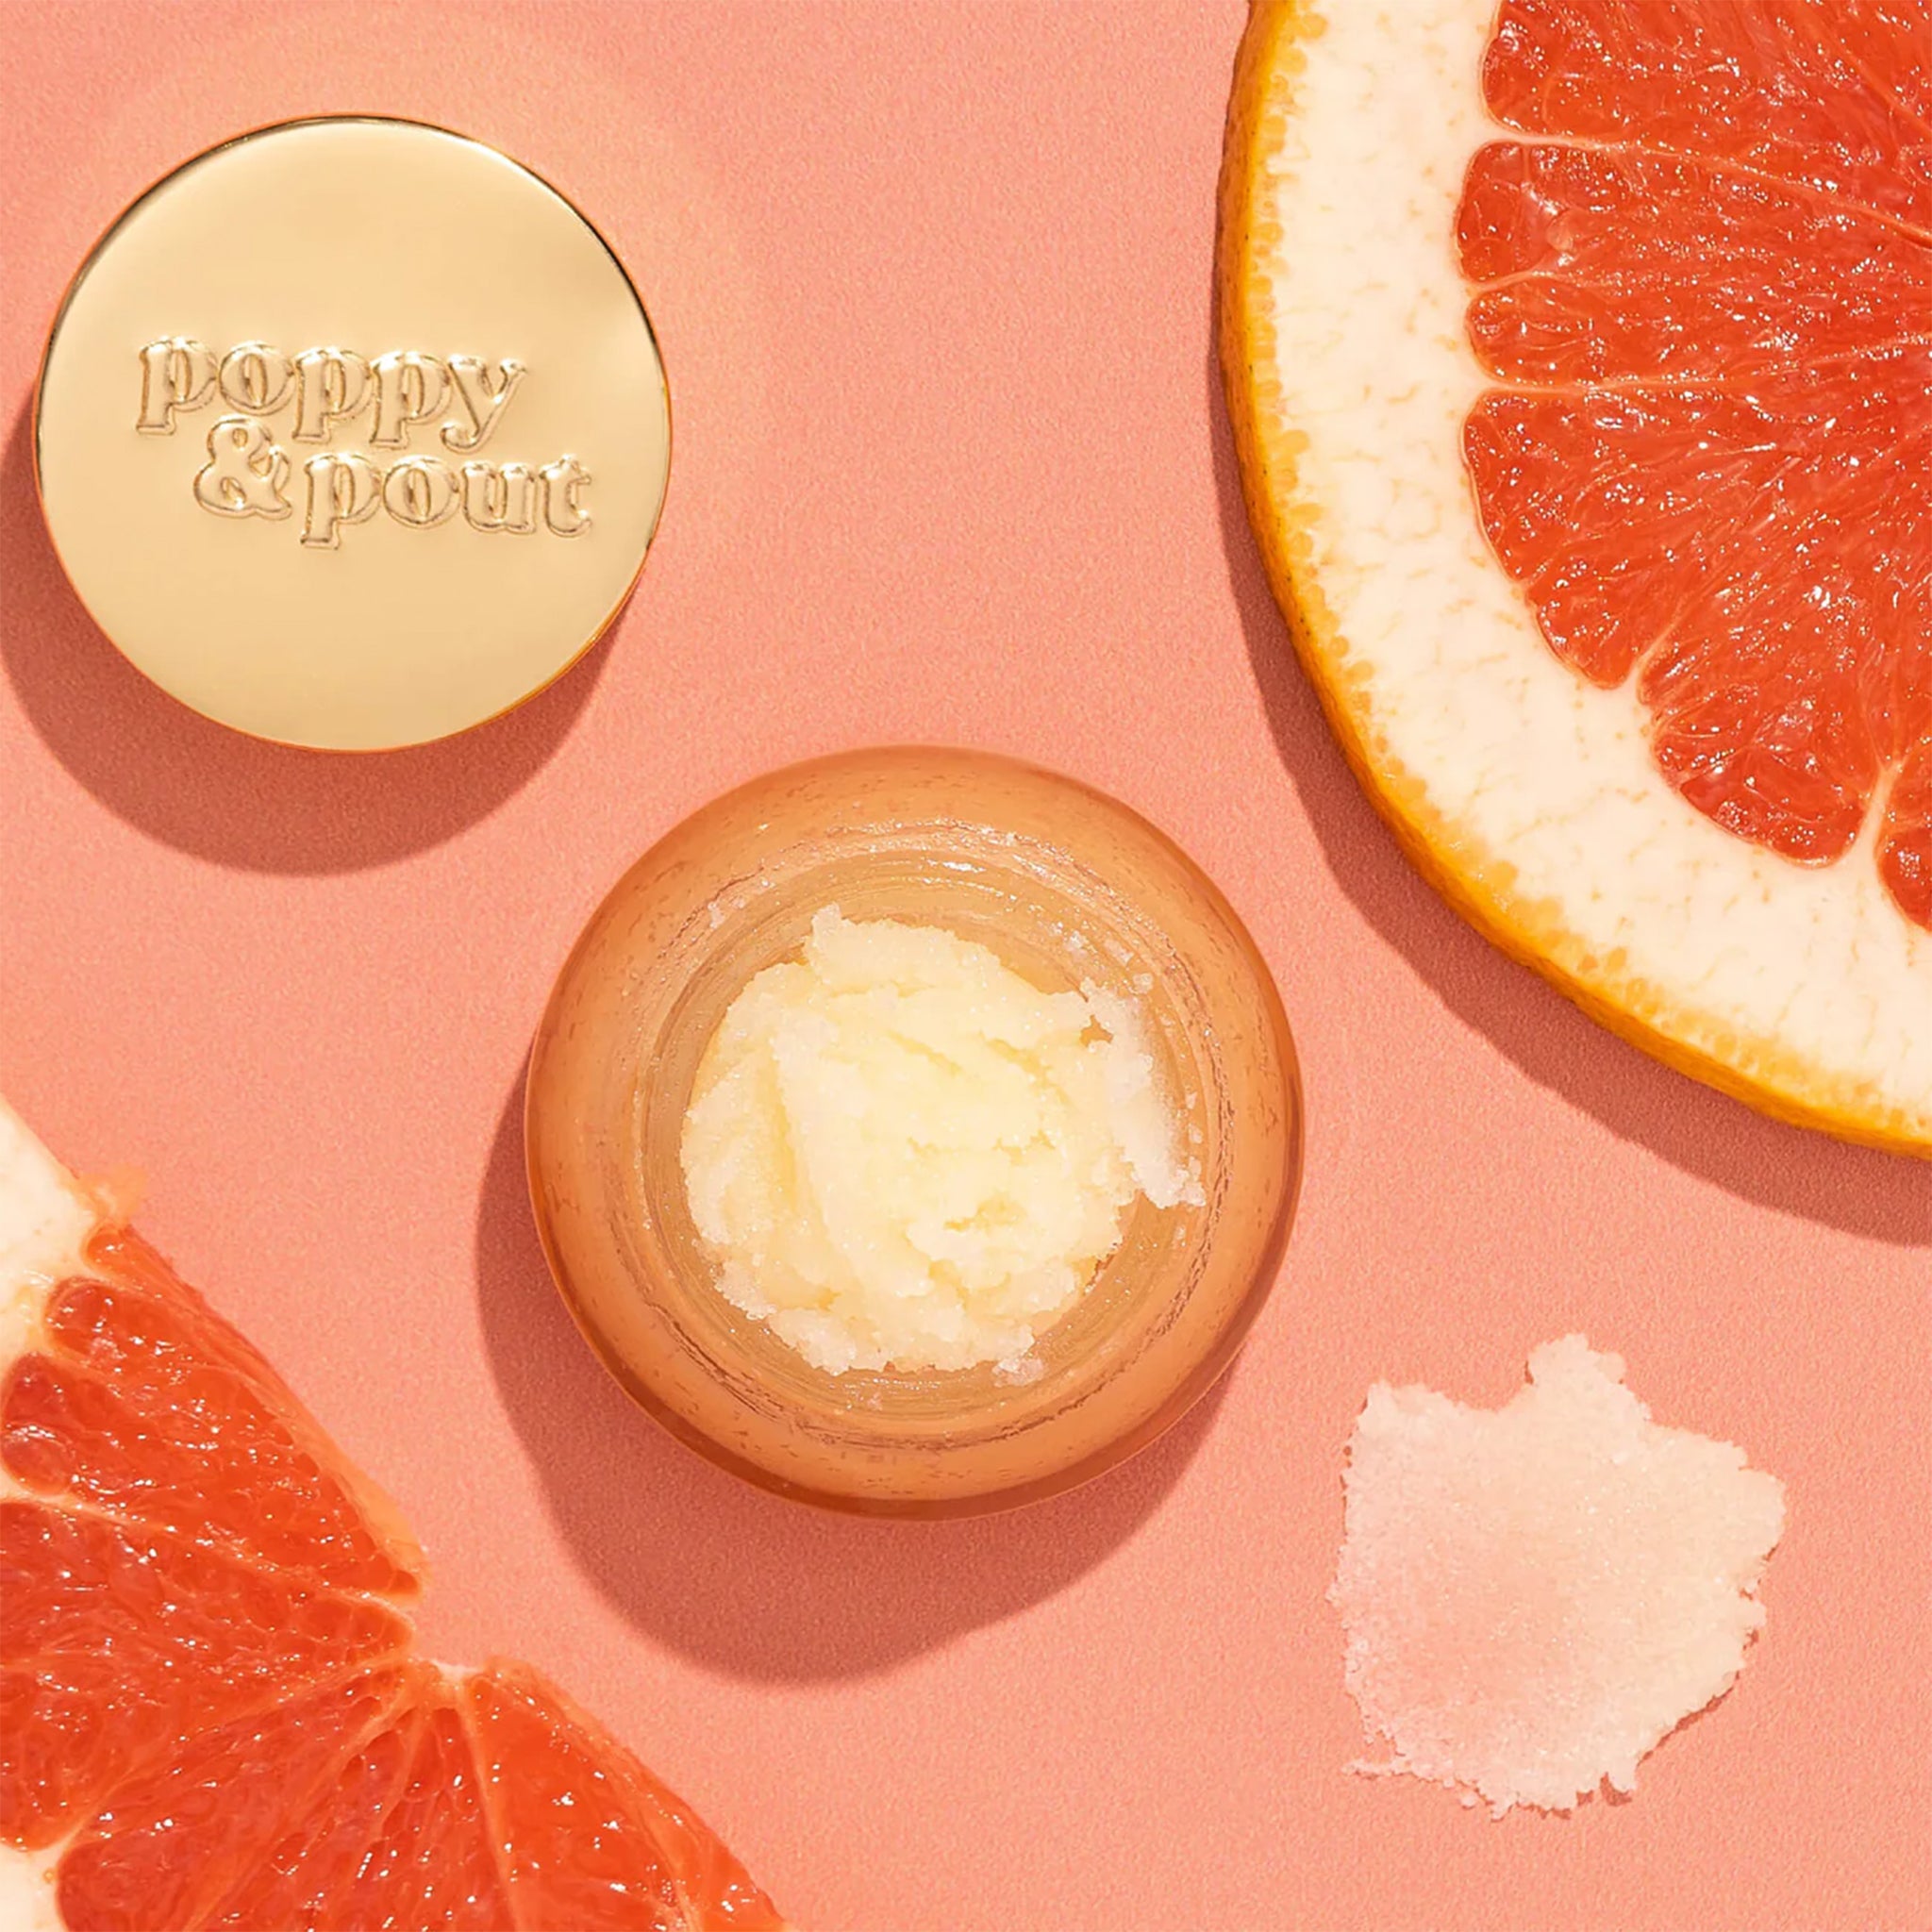  Lip scrub in a light orange colored container with a gold lid. This lip scrub is grainy, hydrating and perfect for your lips.